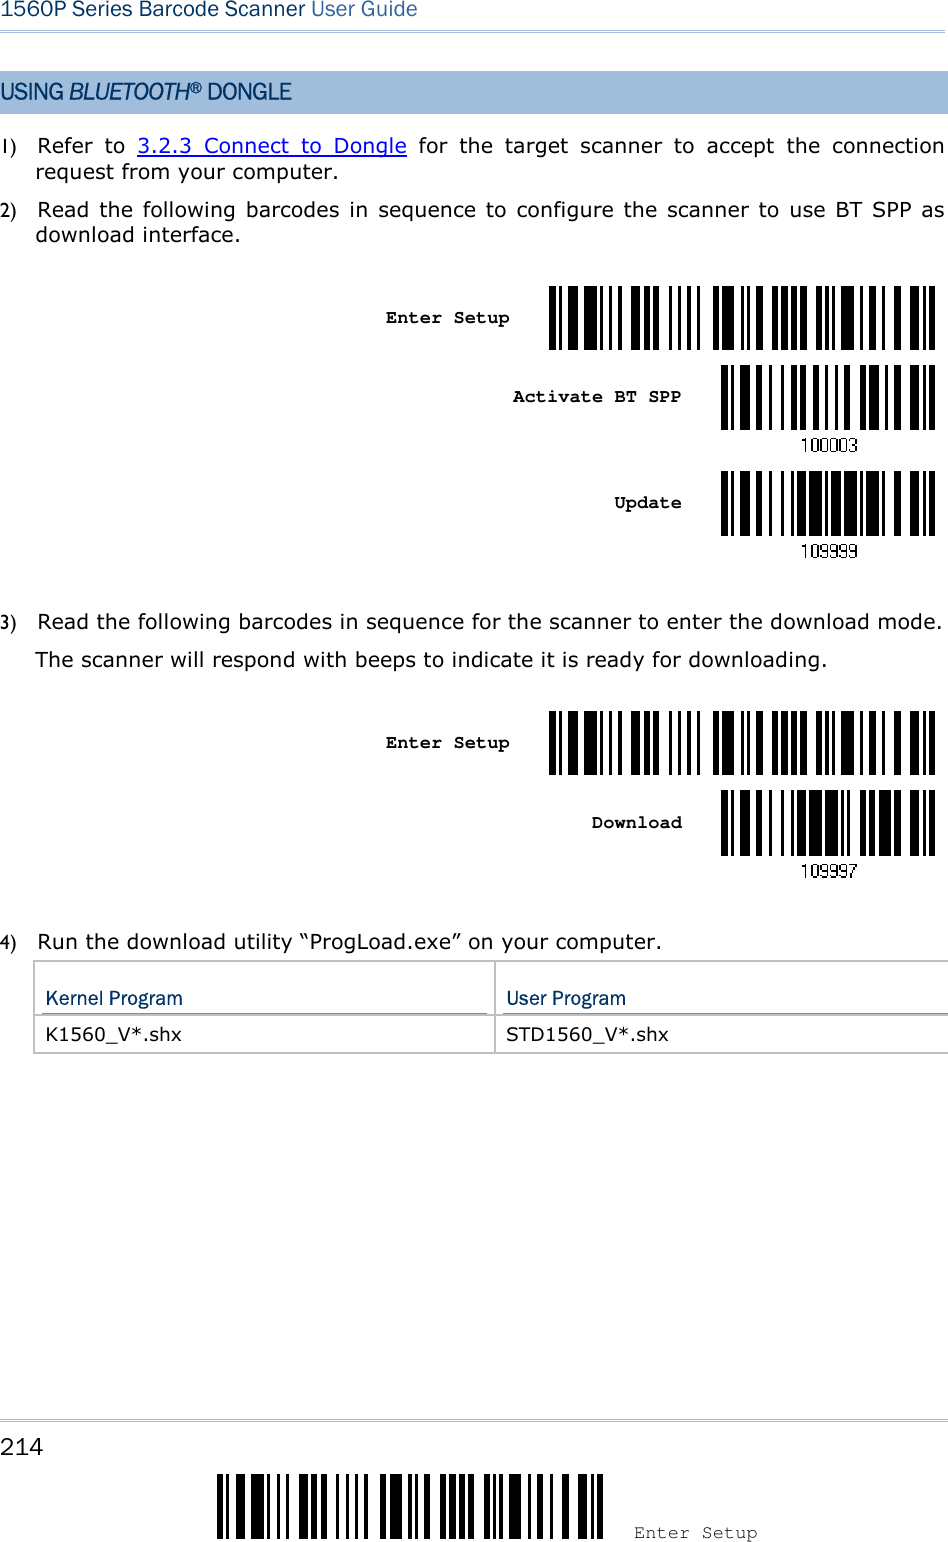 214 Enter Setup 1560P Series Barcode Scanner User Guide USING BLUETOOTH® DONGLE 1) Refer  to  3.2.3  Connect  to  Dongle  for  the  target  scanner  to  accept  the  connectionrequest from your computer.2) Read  the following  barcodes in  sequence  to  configure the scanner to  use BT SPP  asdownload interface.Enter Setup Activate BT SPP Update 3) Read the following barcodes in sequence for the scanner to enter the download mode.The scanner will respond with beeps to indicate it is ready for downloading.Enter Setup Download 4) Run the download utility “ProgLoad.exe” on your computer.Kernel Program  User Program K1560_V*.shx  STD1560_V*.shx 